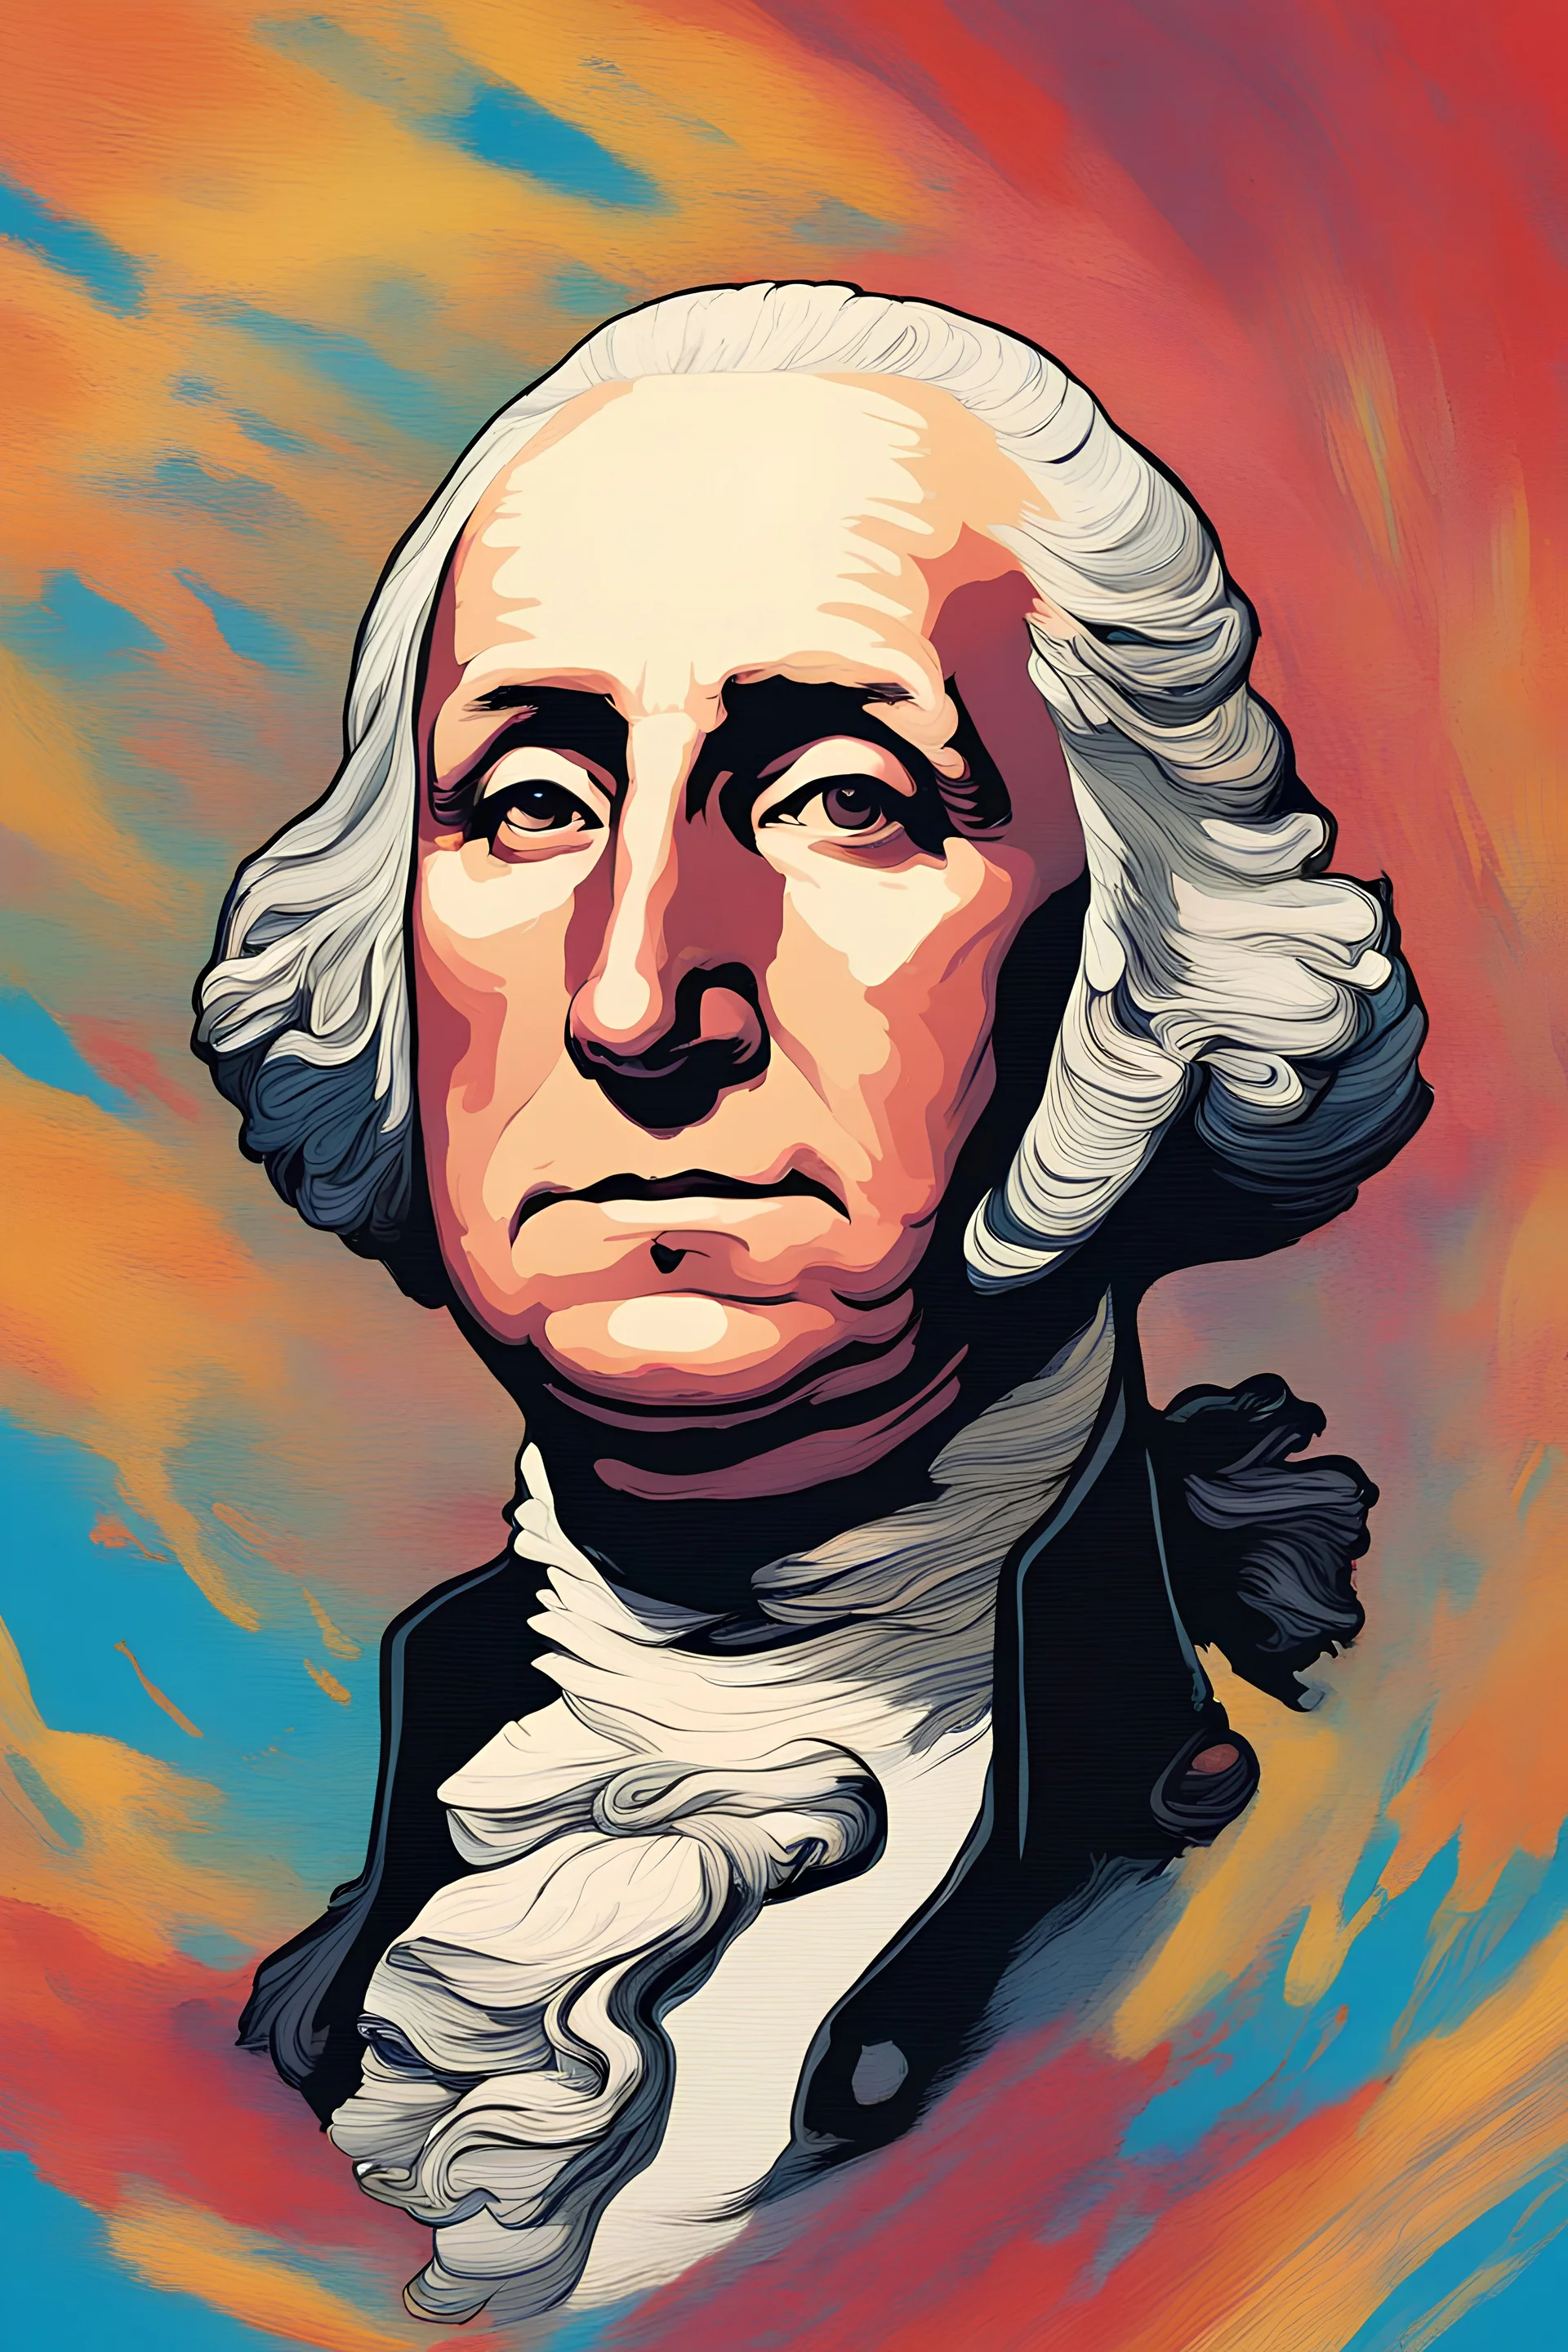 "Generate an artistic portrayal of George Washington's visage slowly melting, resembling paint trickling down a canvas, capturing the surreal transformation with vivid colors and fluid motion."